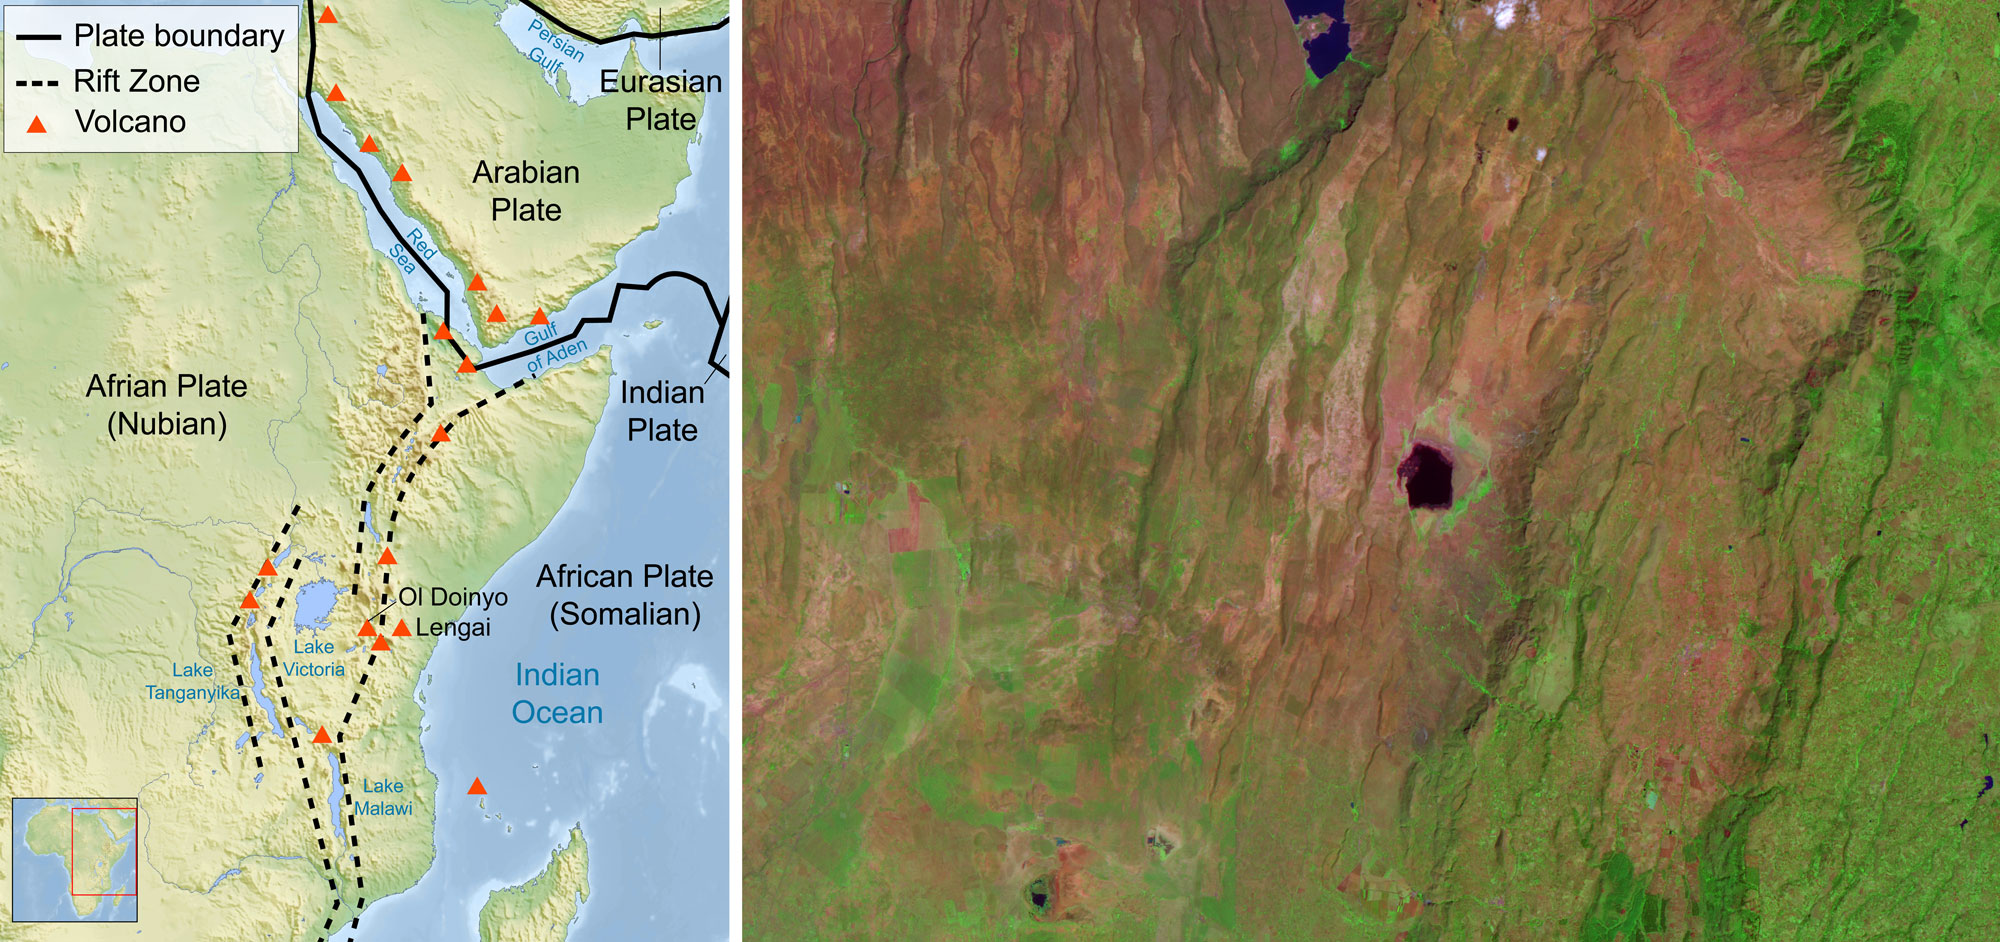 2-Panel image showing rift formation in modern East Africa. Panel 1: Map of the East Africa-Arabia region showing rift zones running north-south from the Red Sea-Gulf of Aden region through the Lake Victoria, Lake Tanganyika, and Lake Malawi regions. Panel 2: Satellite view of a rift valleys in Kenya showing them oriented roughly parallel to one another.